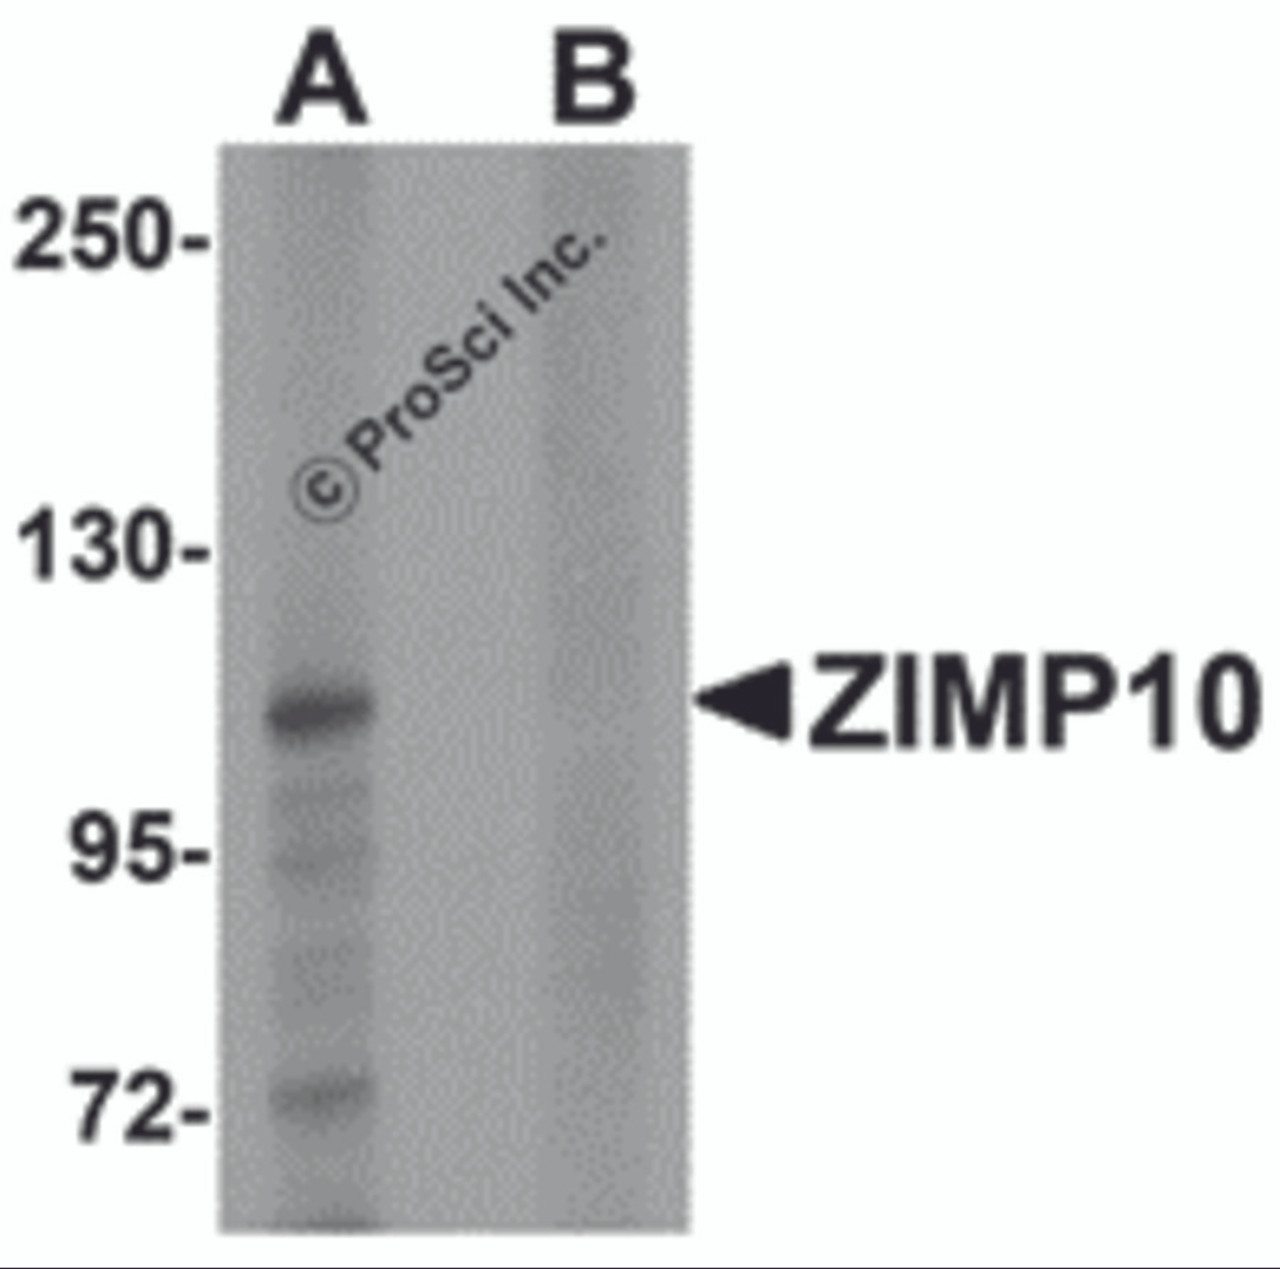 Western blot analysis of ZIMP10 in K562 cell lysate with ZIMP10 antibody at 0.5 &#956;g/mL in (A) the absence and (B) the presence of blocking peptide